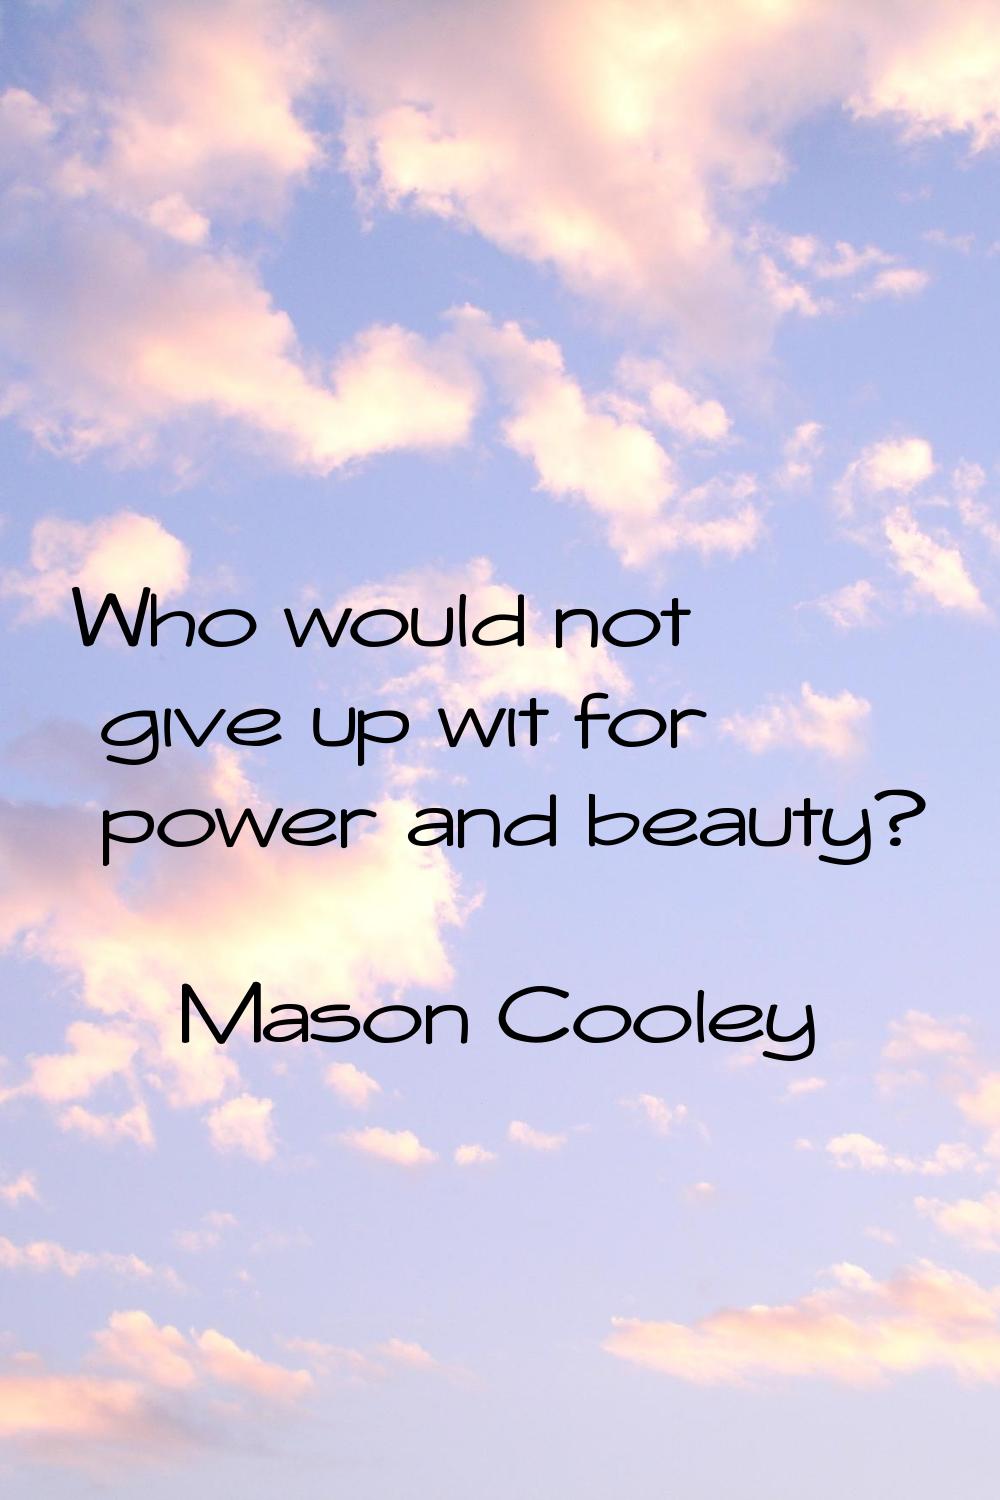 Who would not give up wit for power and beauty?